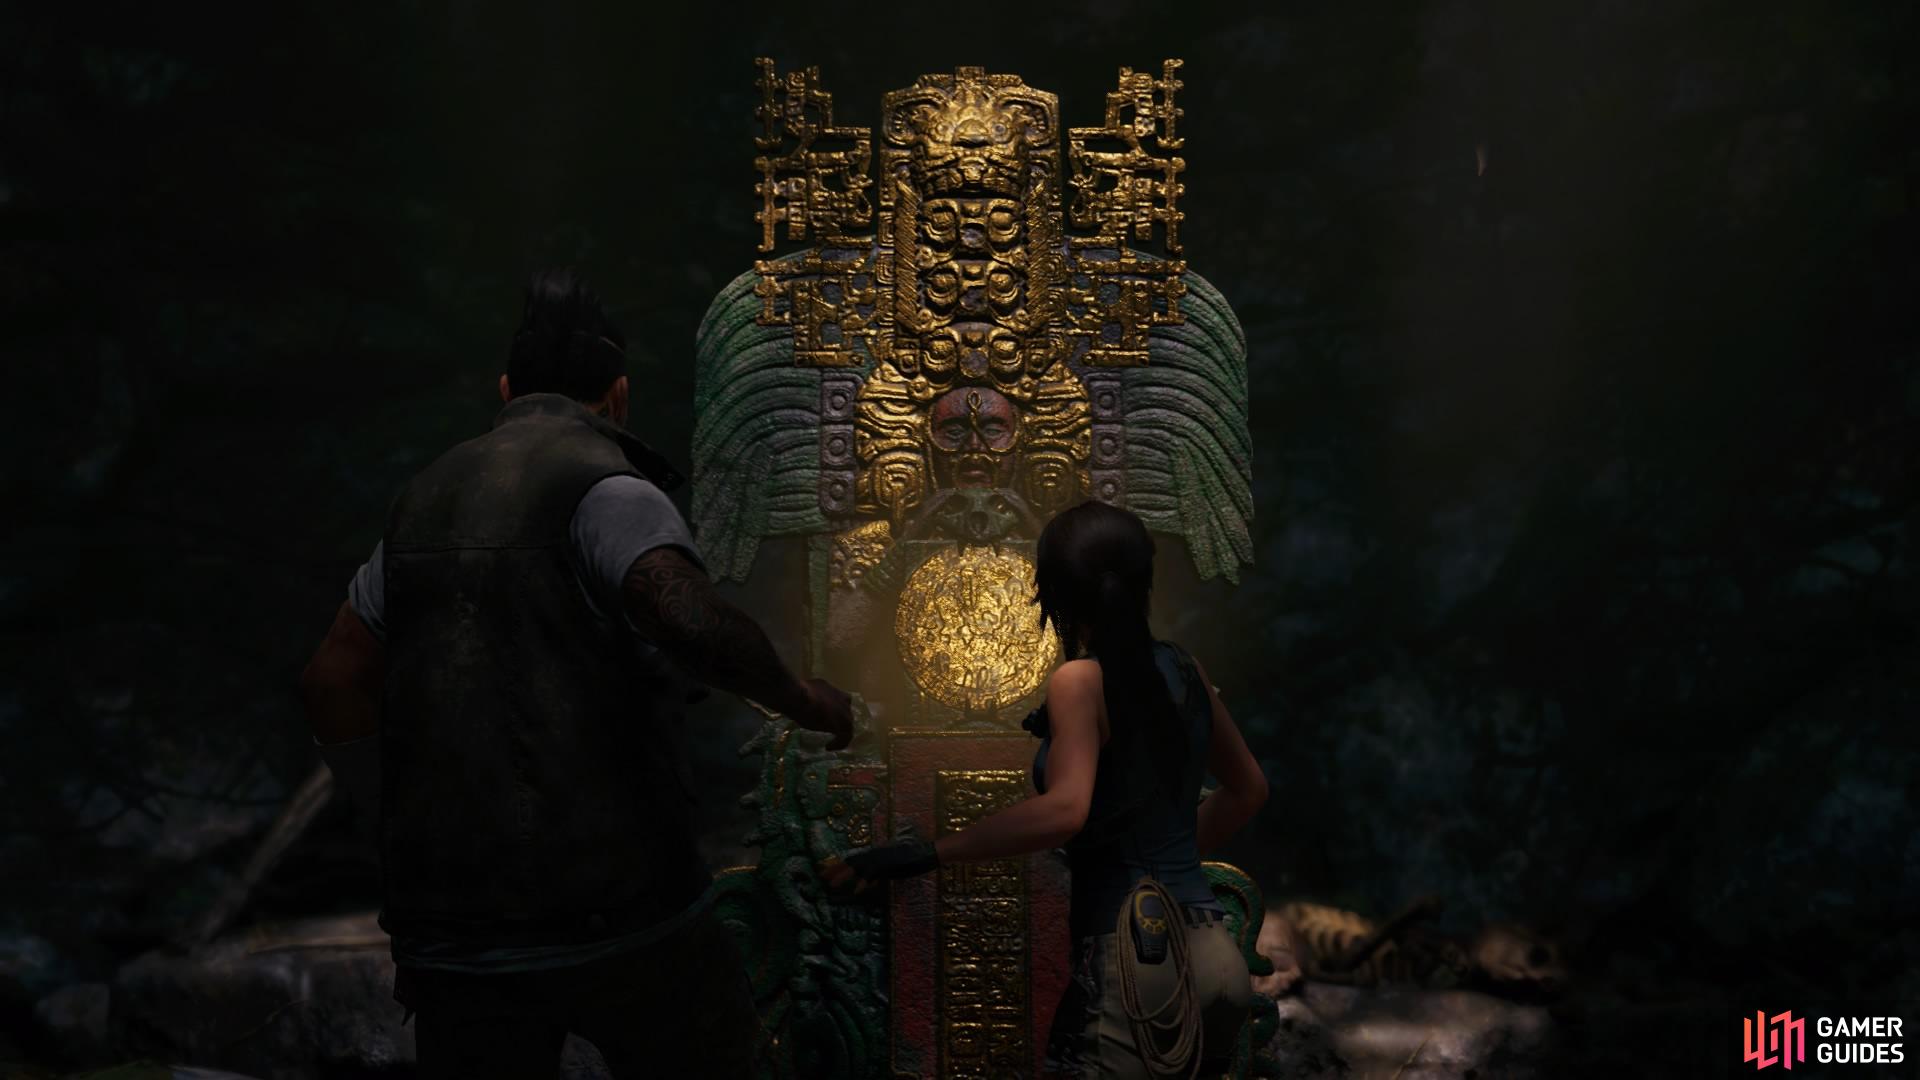 Lara will automatically interact with the stele